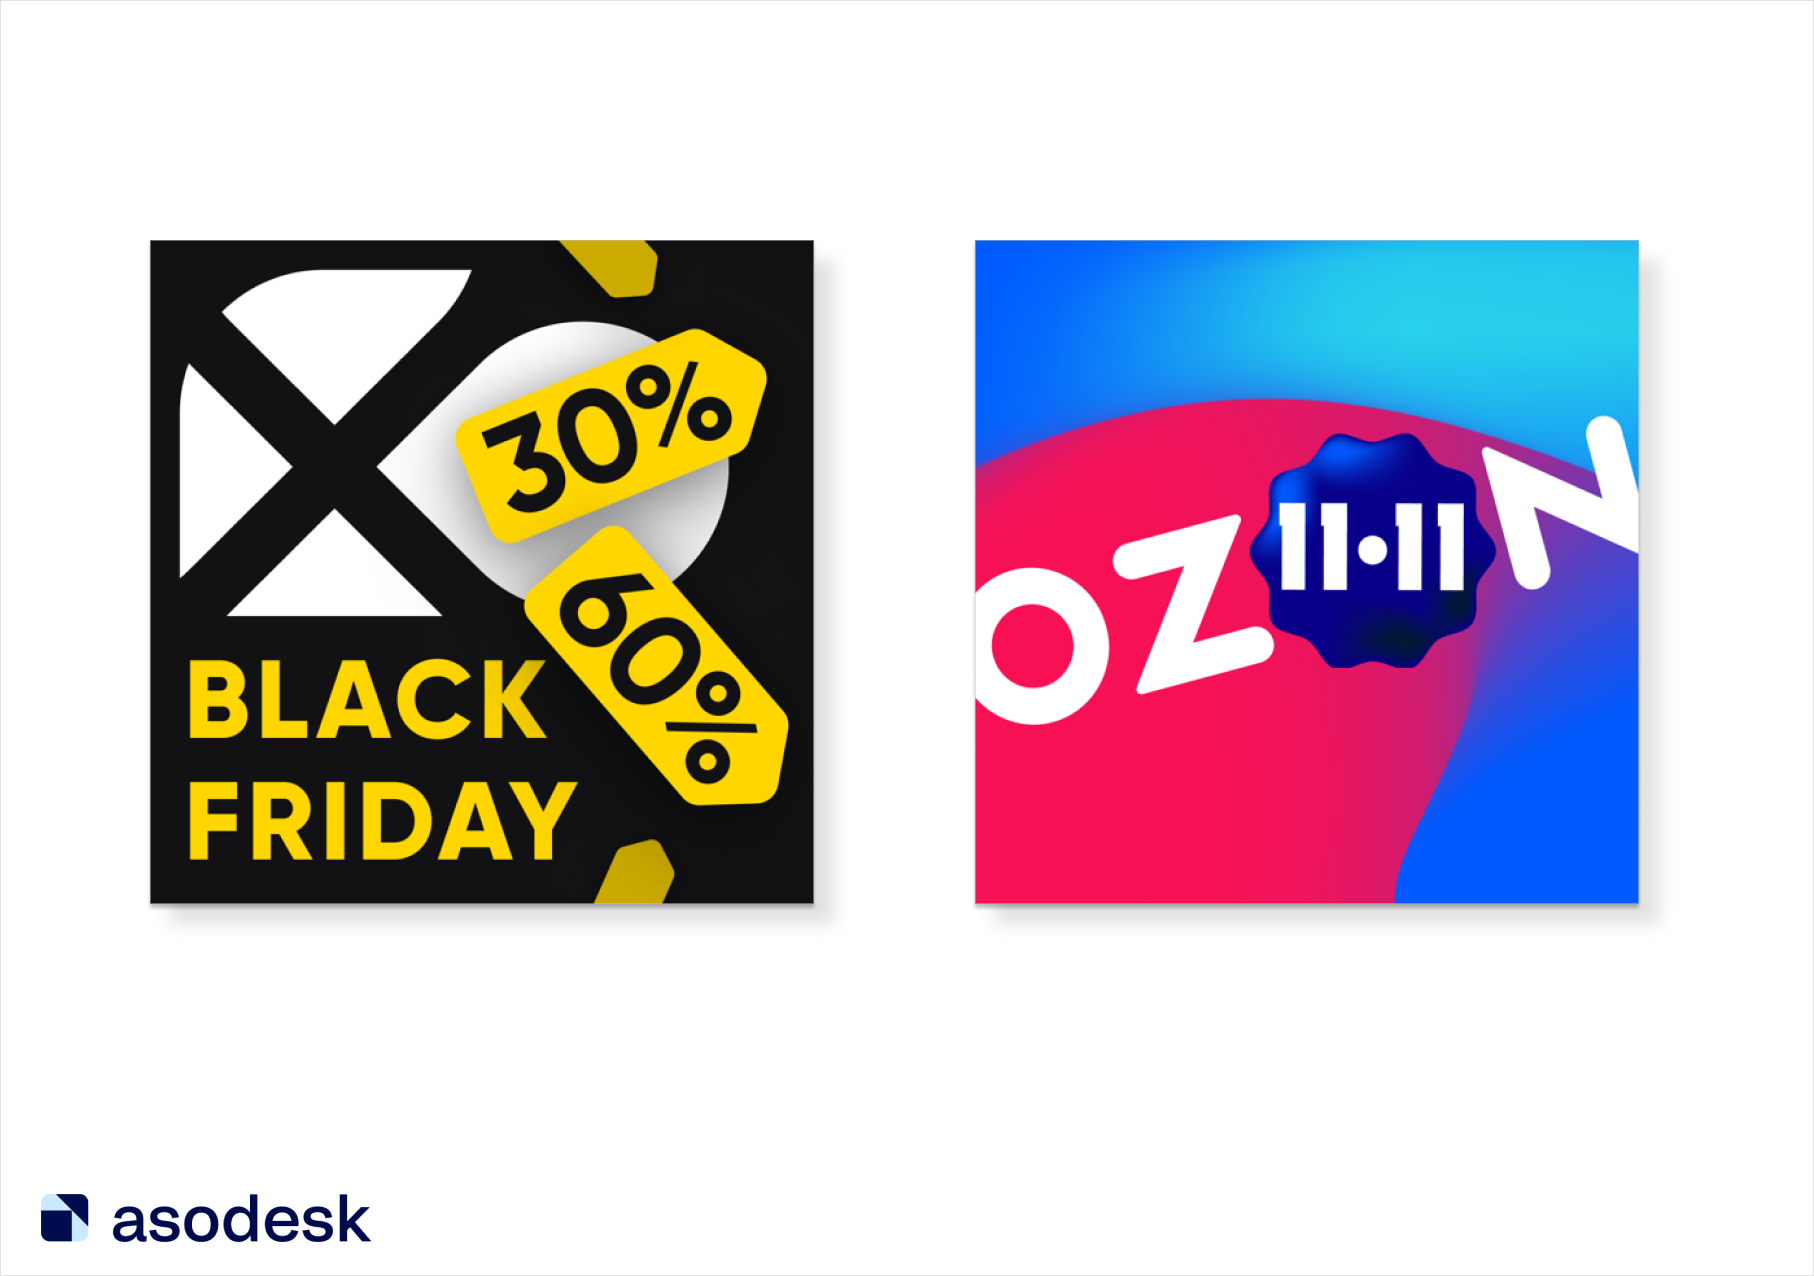 Ozon and “Perekrestok Vprok” changed app icons for Black Friday and 11.11